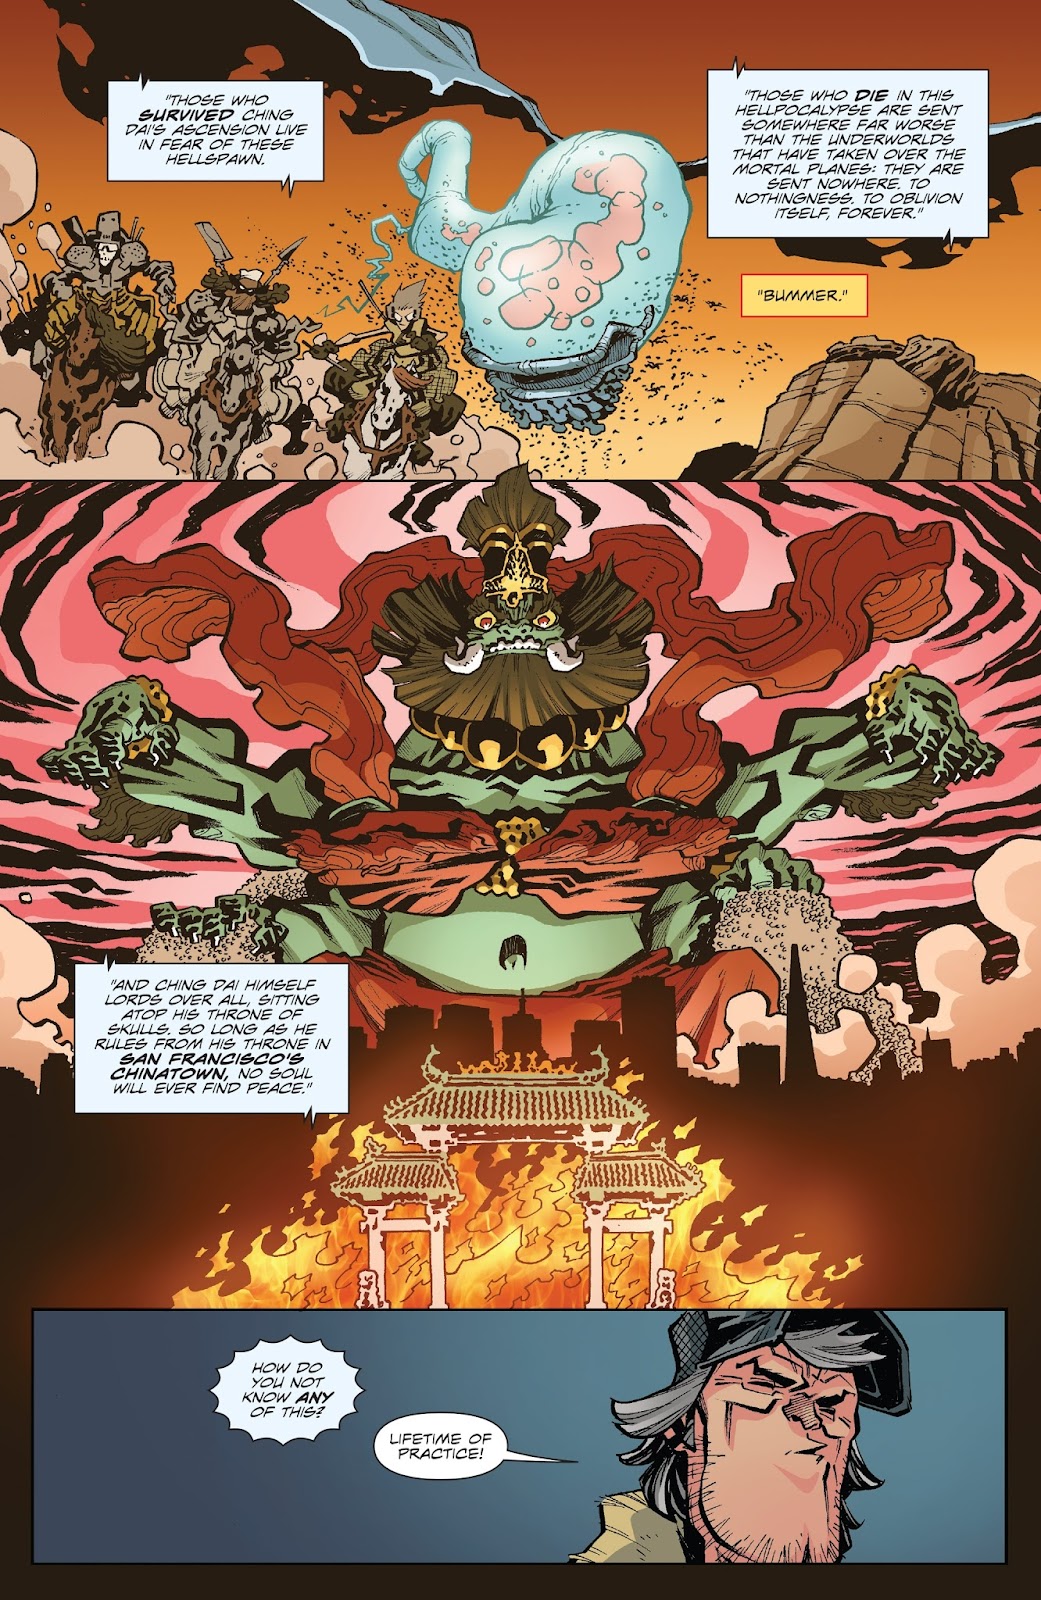 Big Trouble in Little China: Old Man Jack issue 1 - Page 14